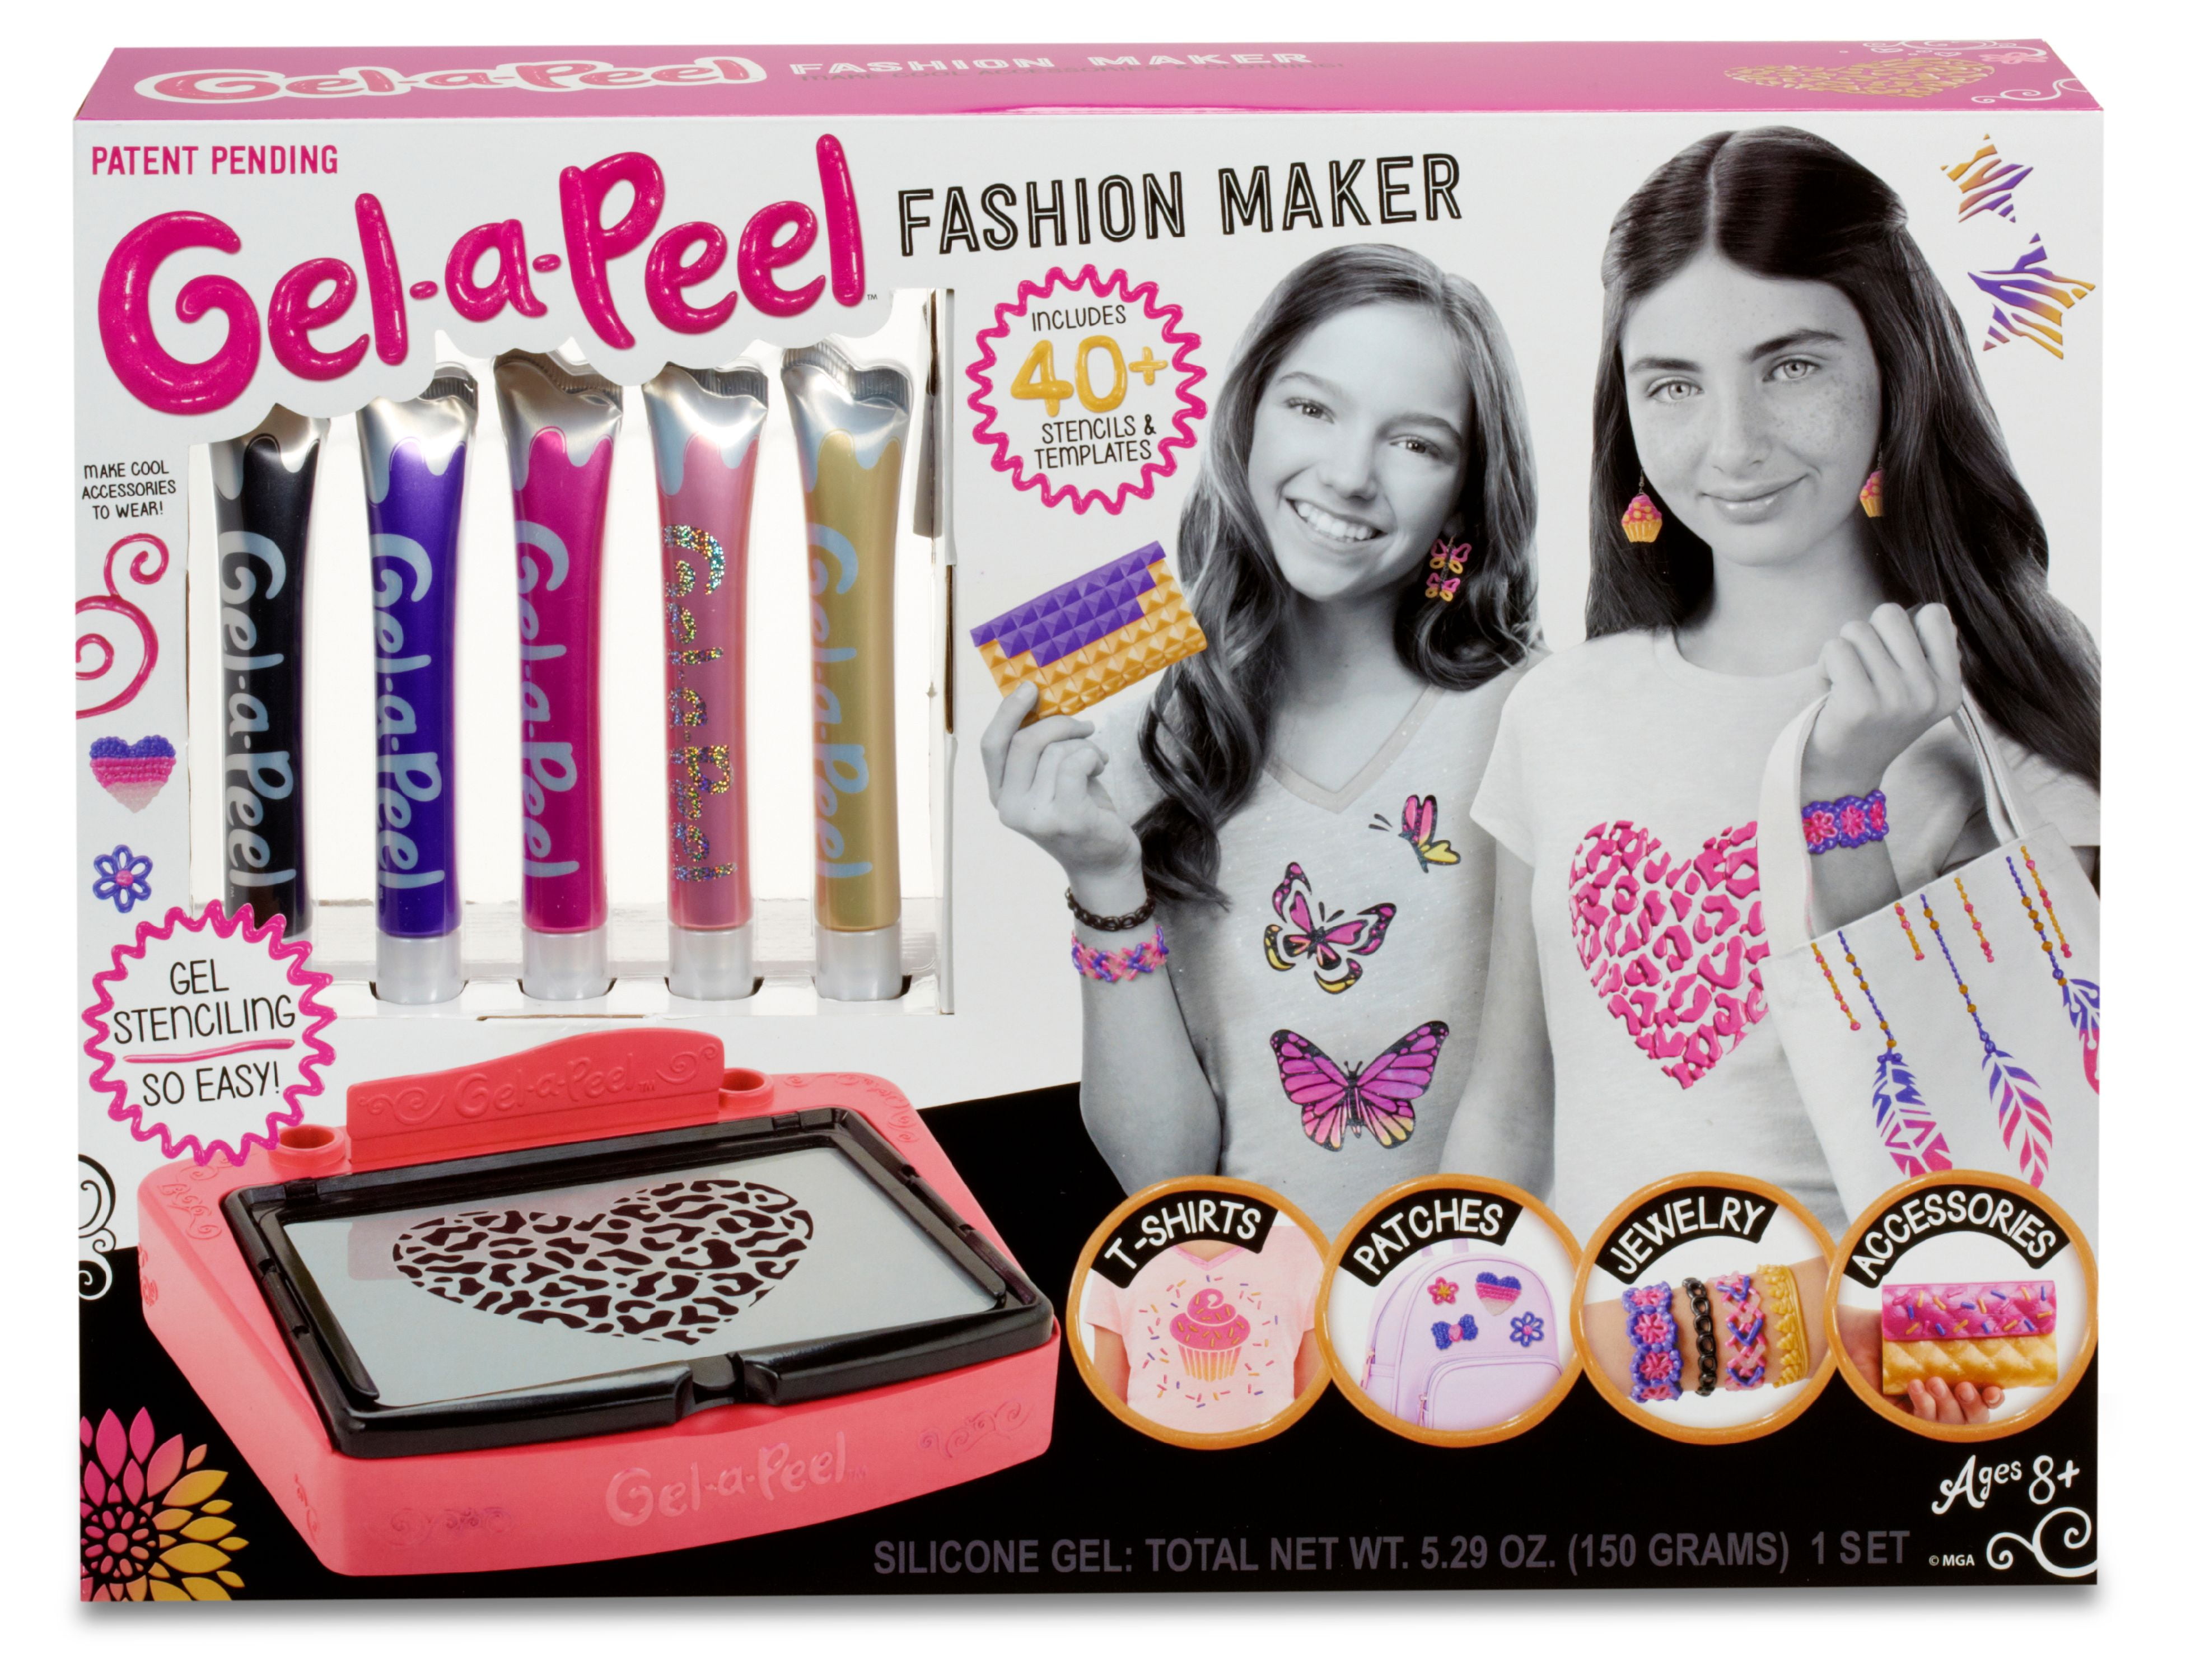  Cool Maker, Handcrafted Fashion Patches Activity Kit, Makes 10  Patches, for Ages 8 and Up : Toys & Games